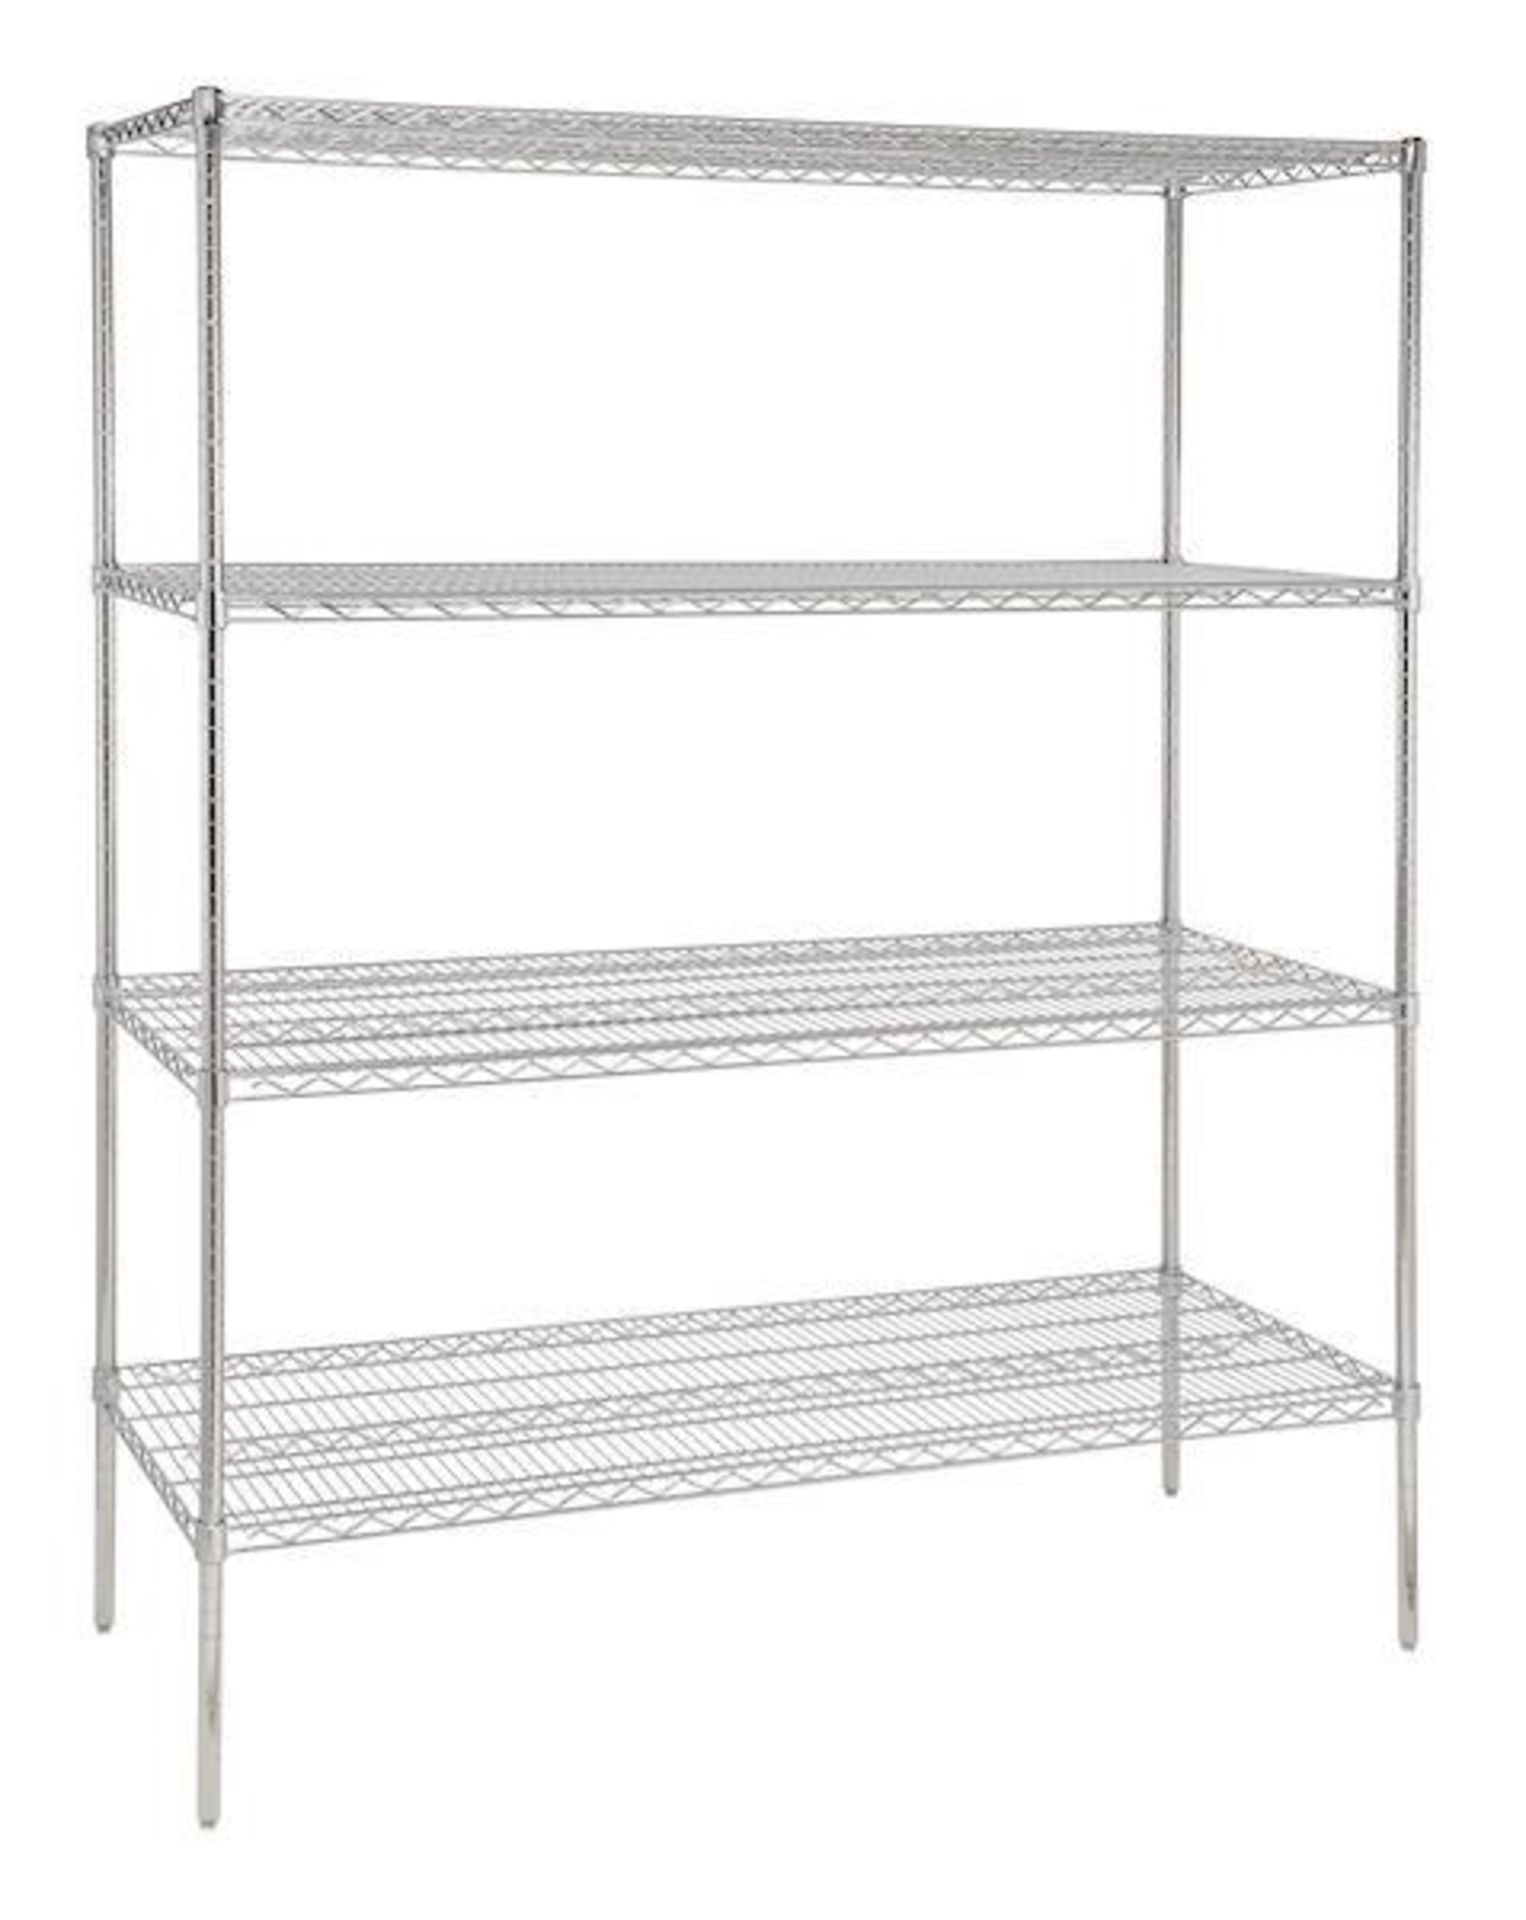 Stainless Steel Wire Rack 1524 mm length